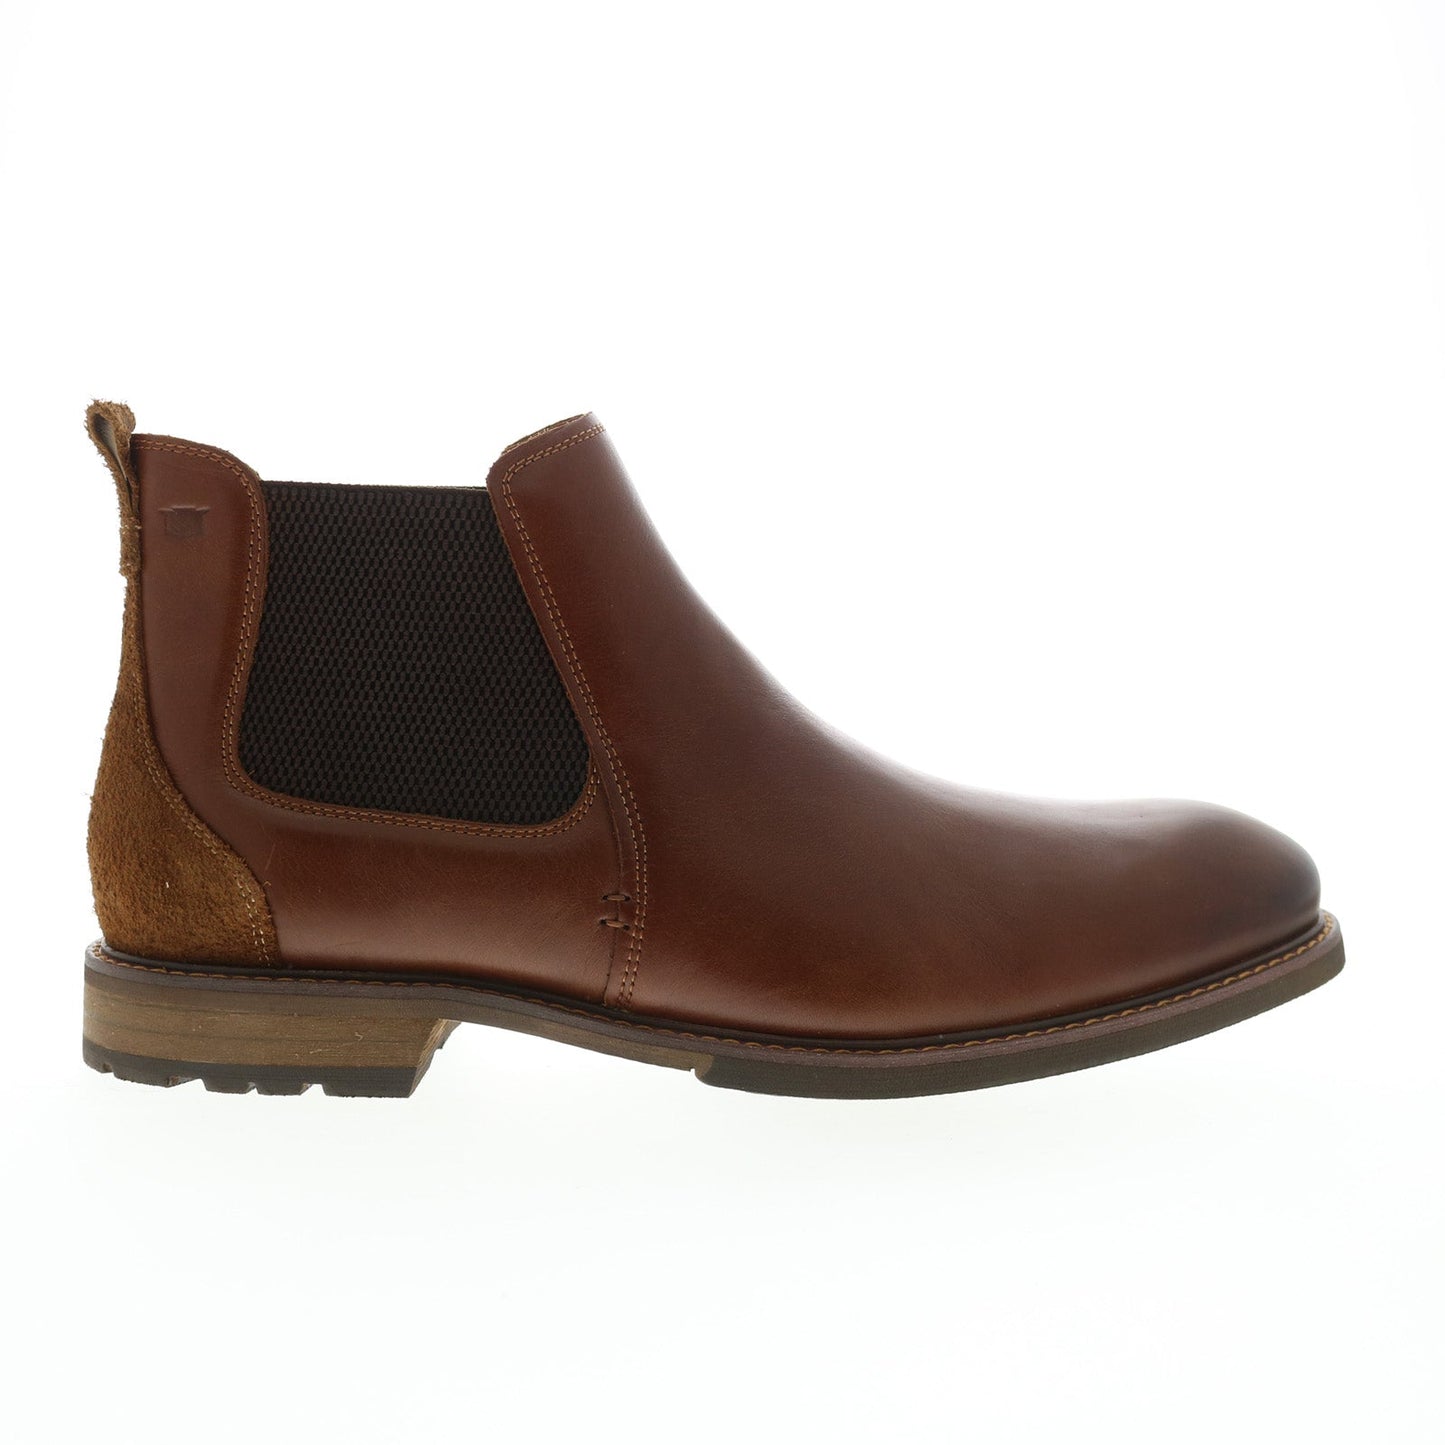 CABIN GORE BOOT CHES | Florsheim Cabin Gore Boot 11781-205-D Mens Brown Leather Chelsea Boots-Brandy